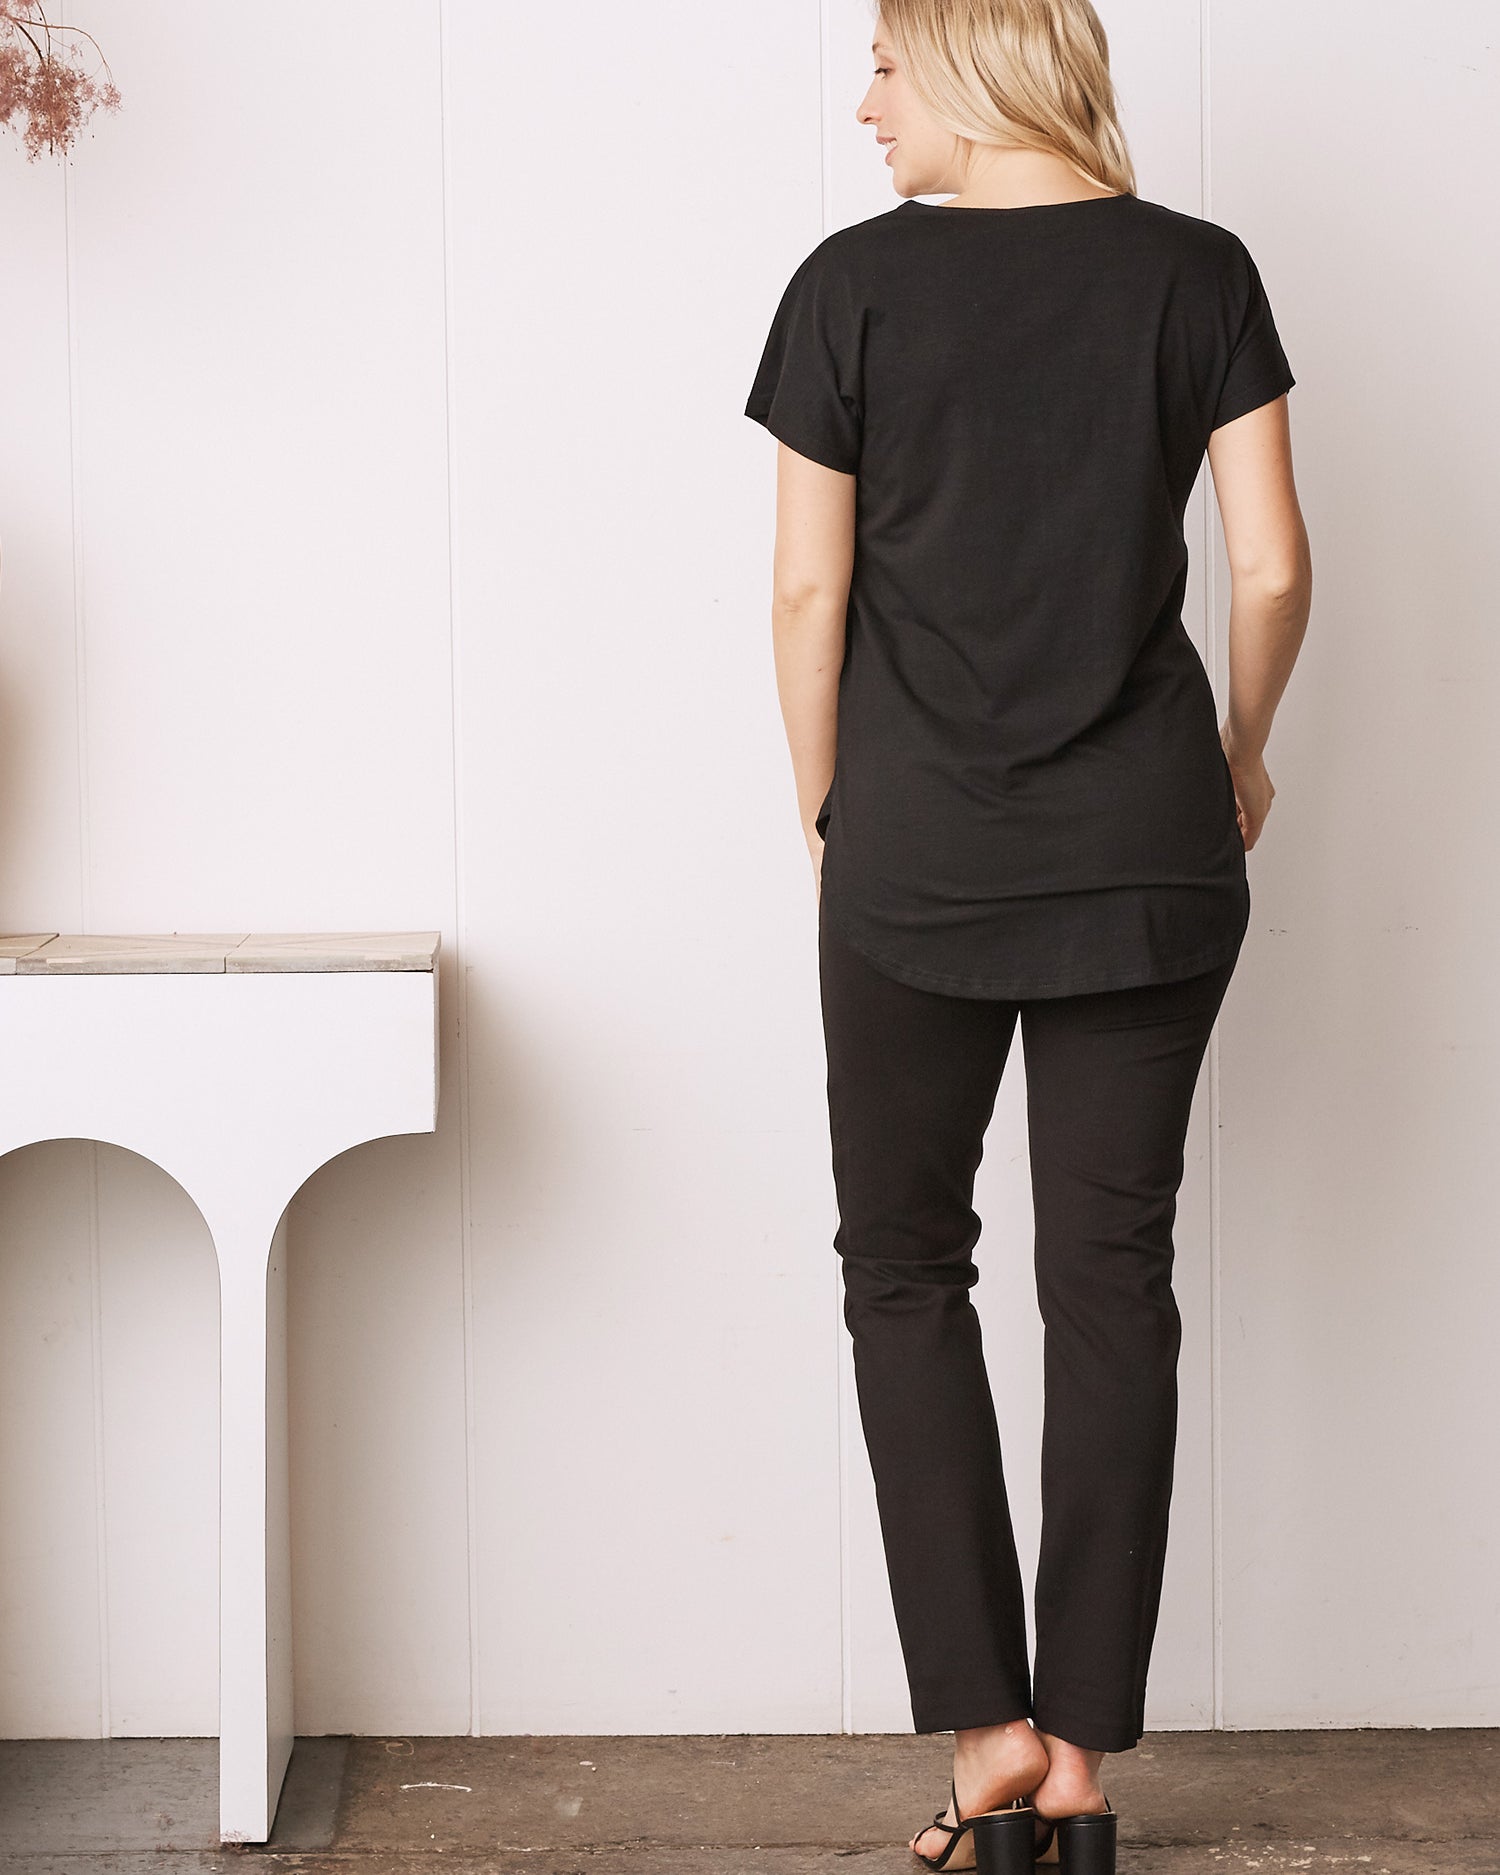 Back view - A Pregnant Woman in Black Short Sleeve Zip Front Maternity Work Blouse (6711878254695)